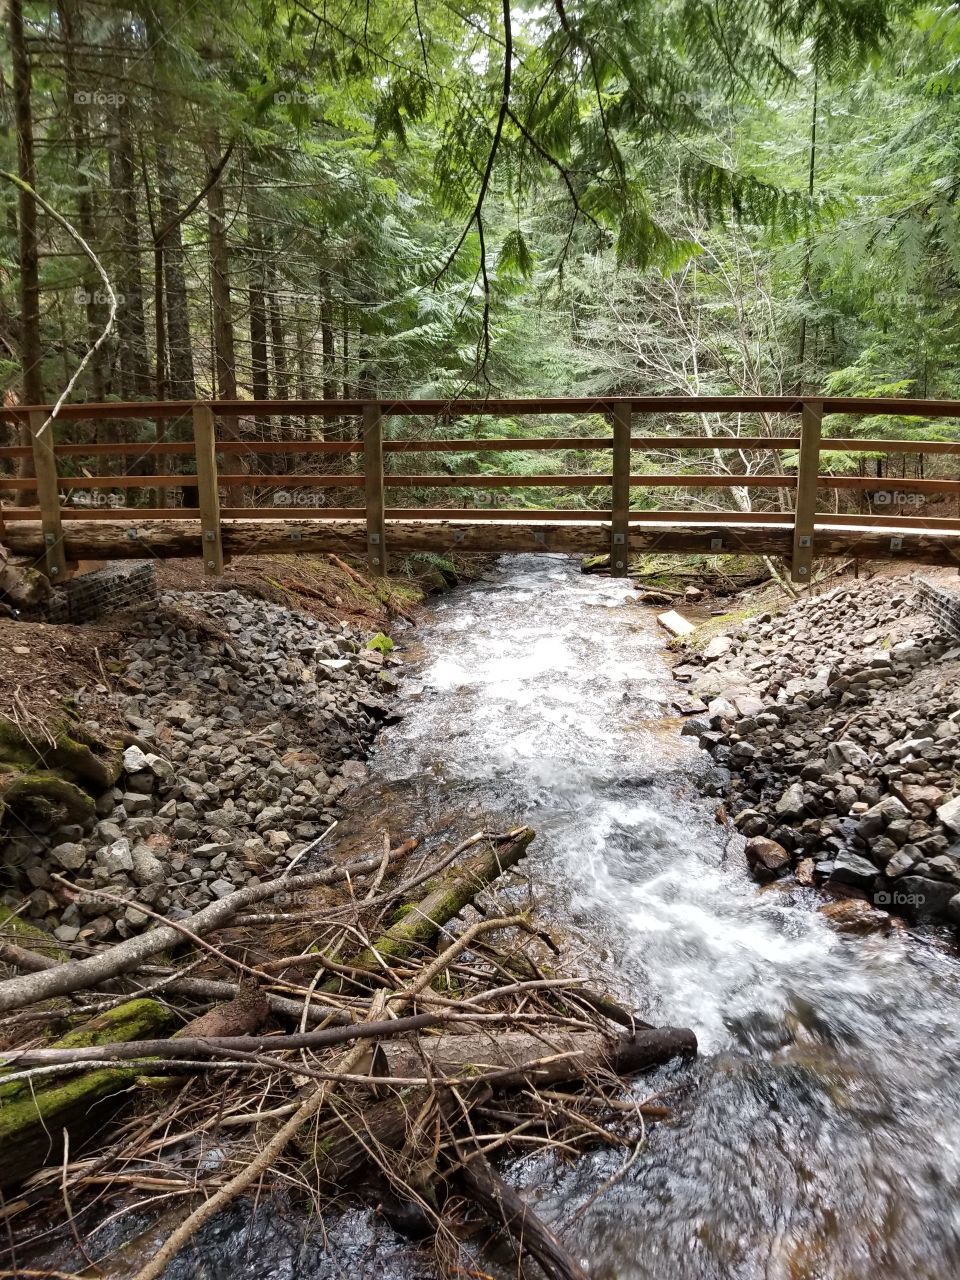 wooden bridge over a flowing creek with rocks, sticks and green foliage on a hike in the woods